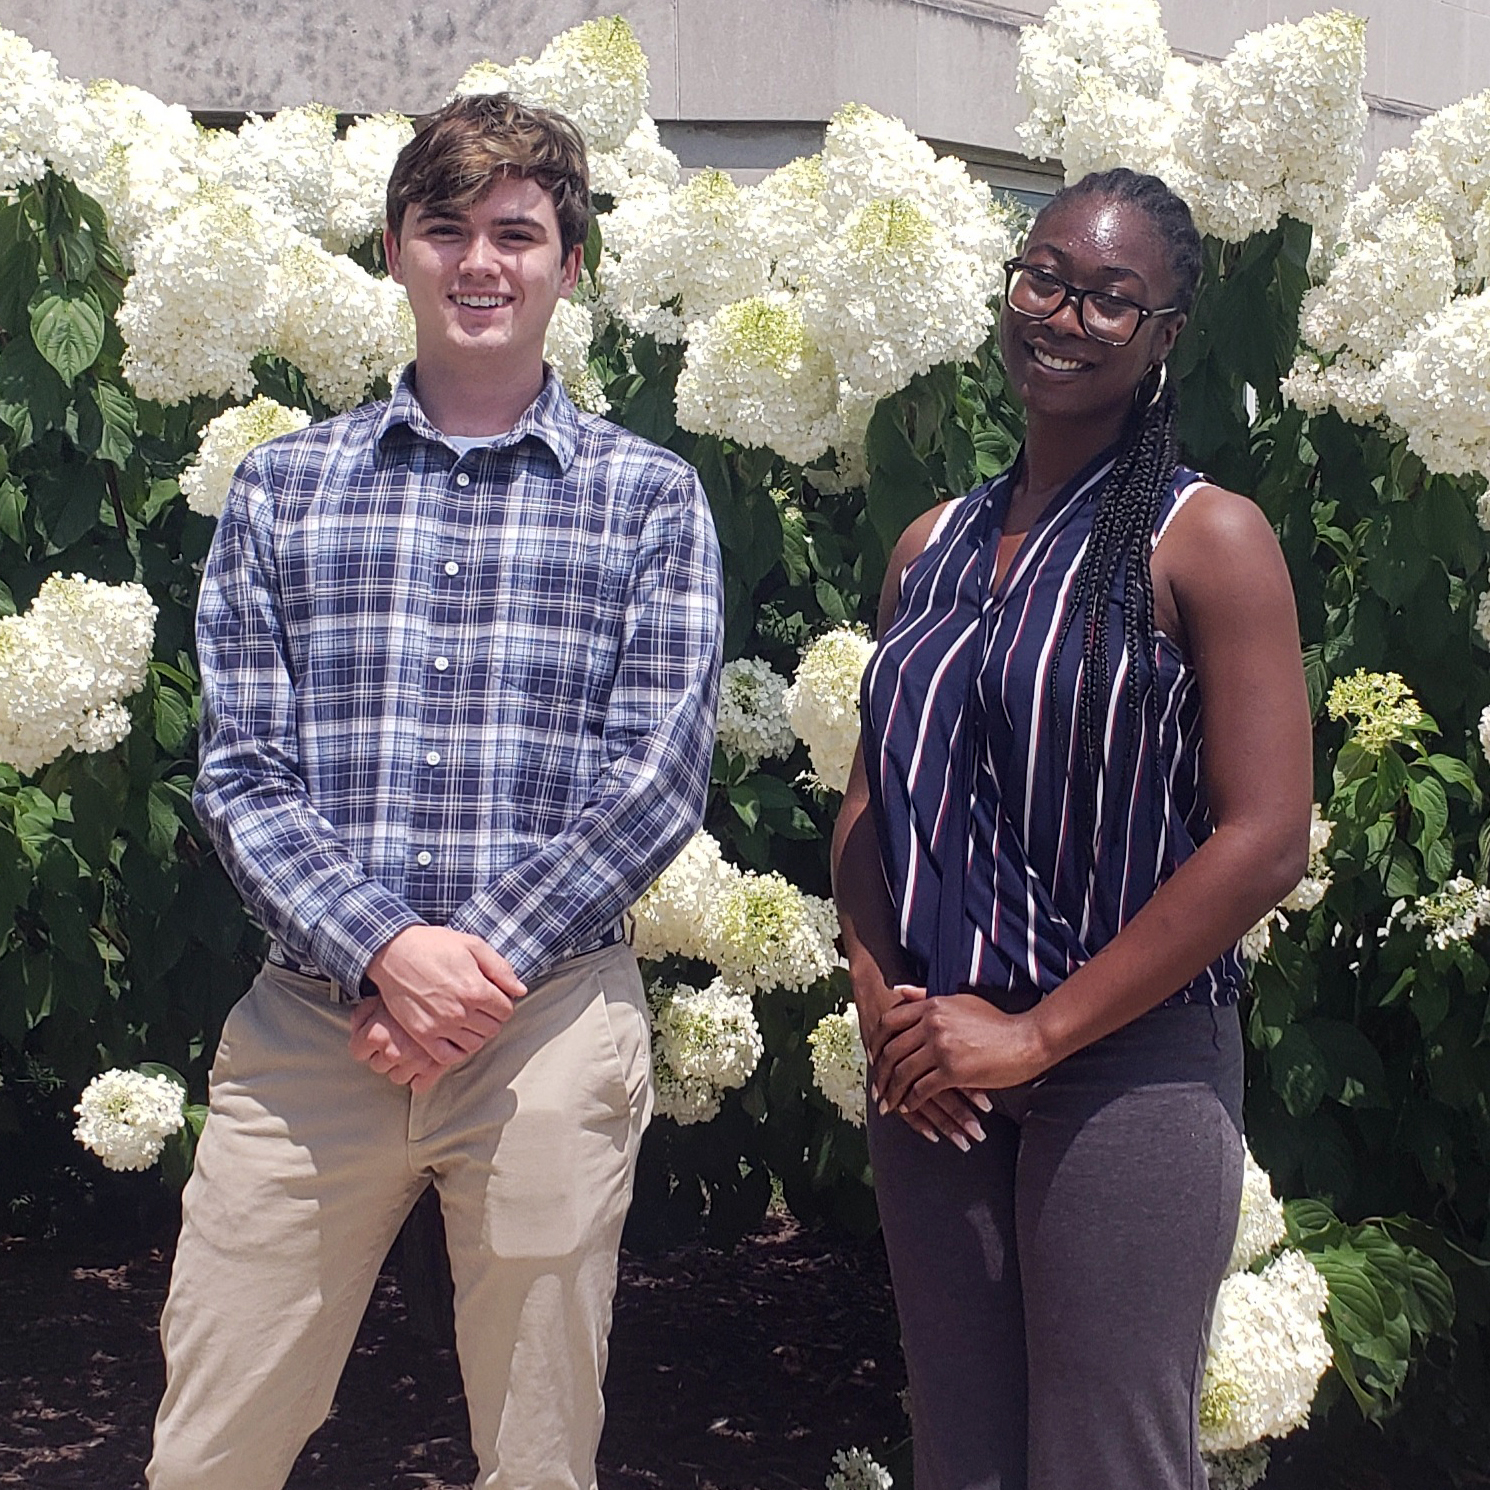 Two SHARP students outside in front of flowering bushes